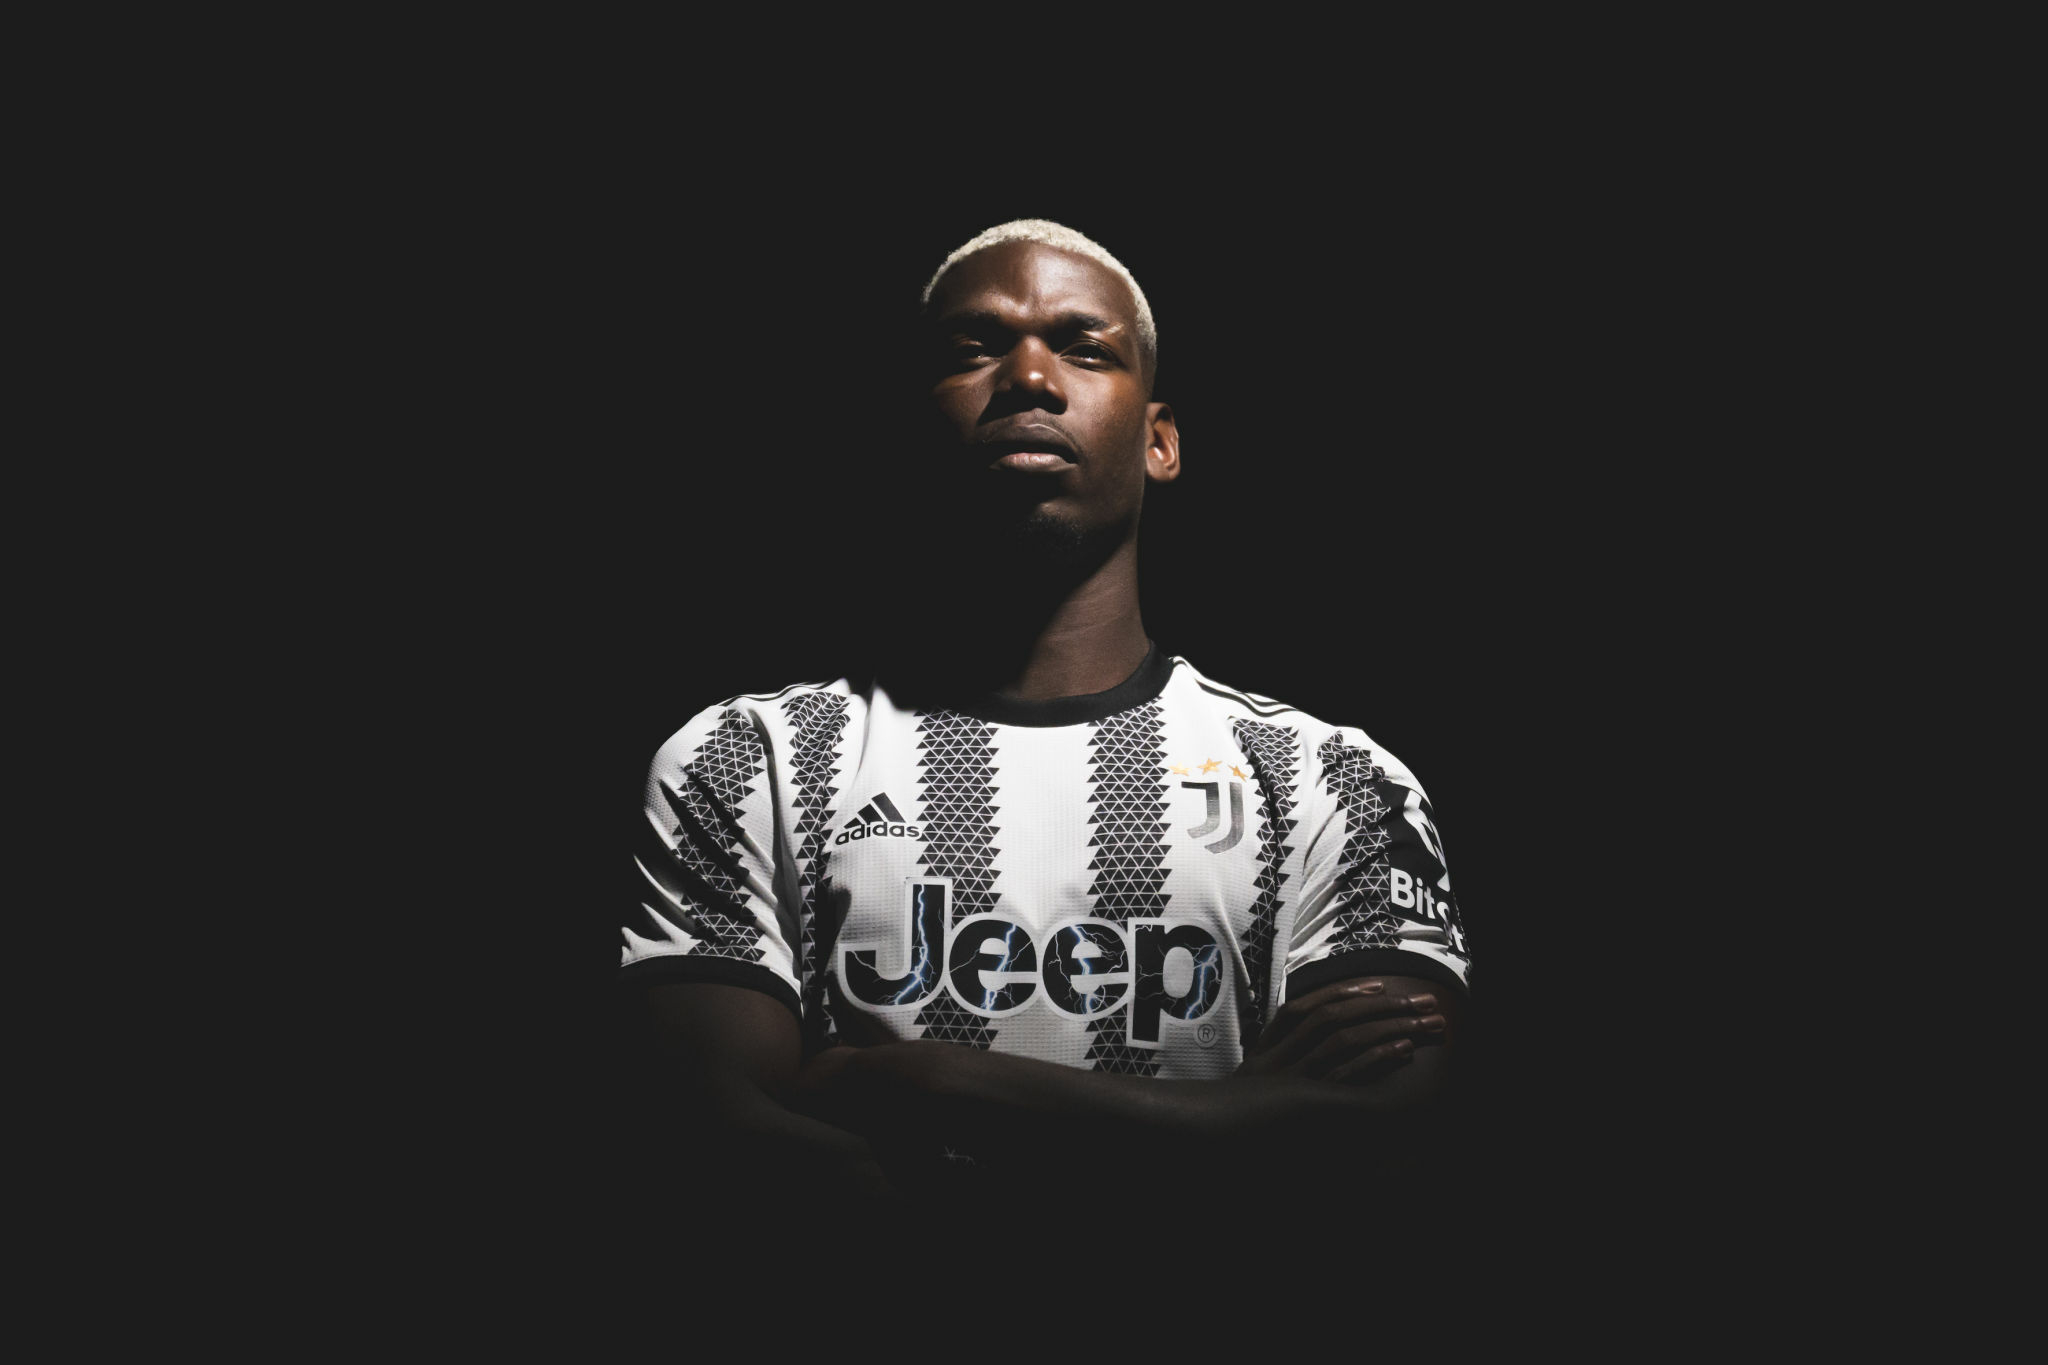 1920x10802021290 Paul Pogba HD 1920x10802021290 Resolution Wallpaper, HD  Sports 4K Wallpapers, Images, Photos and Background - Wallpapers Den